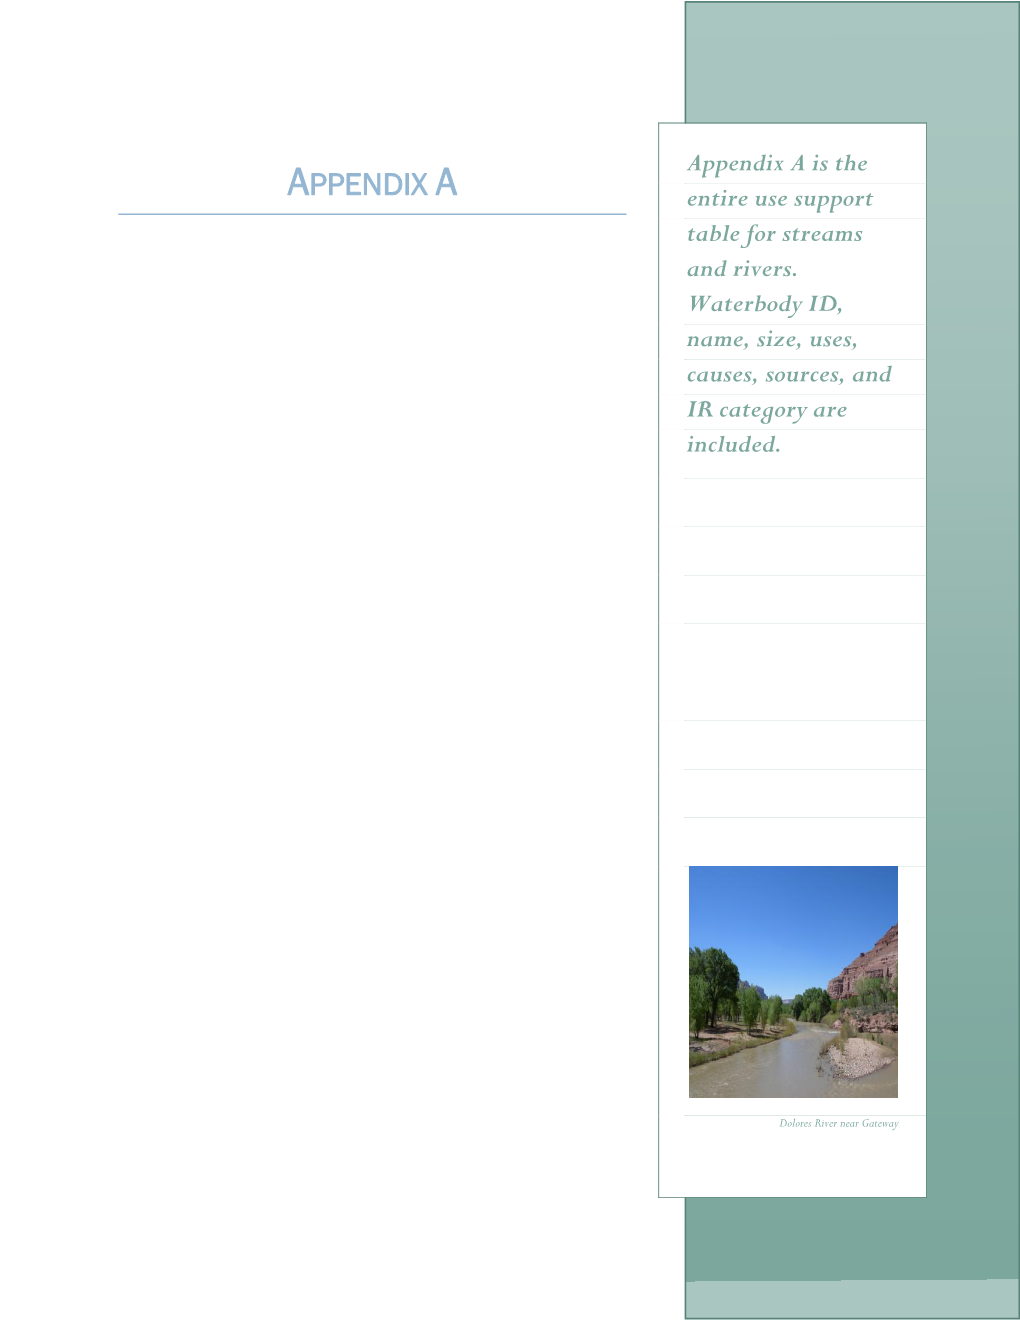 Integrated Water Quality Monitoring and Assessment Report, Appendix A